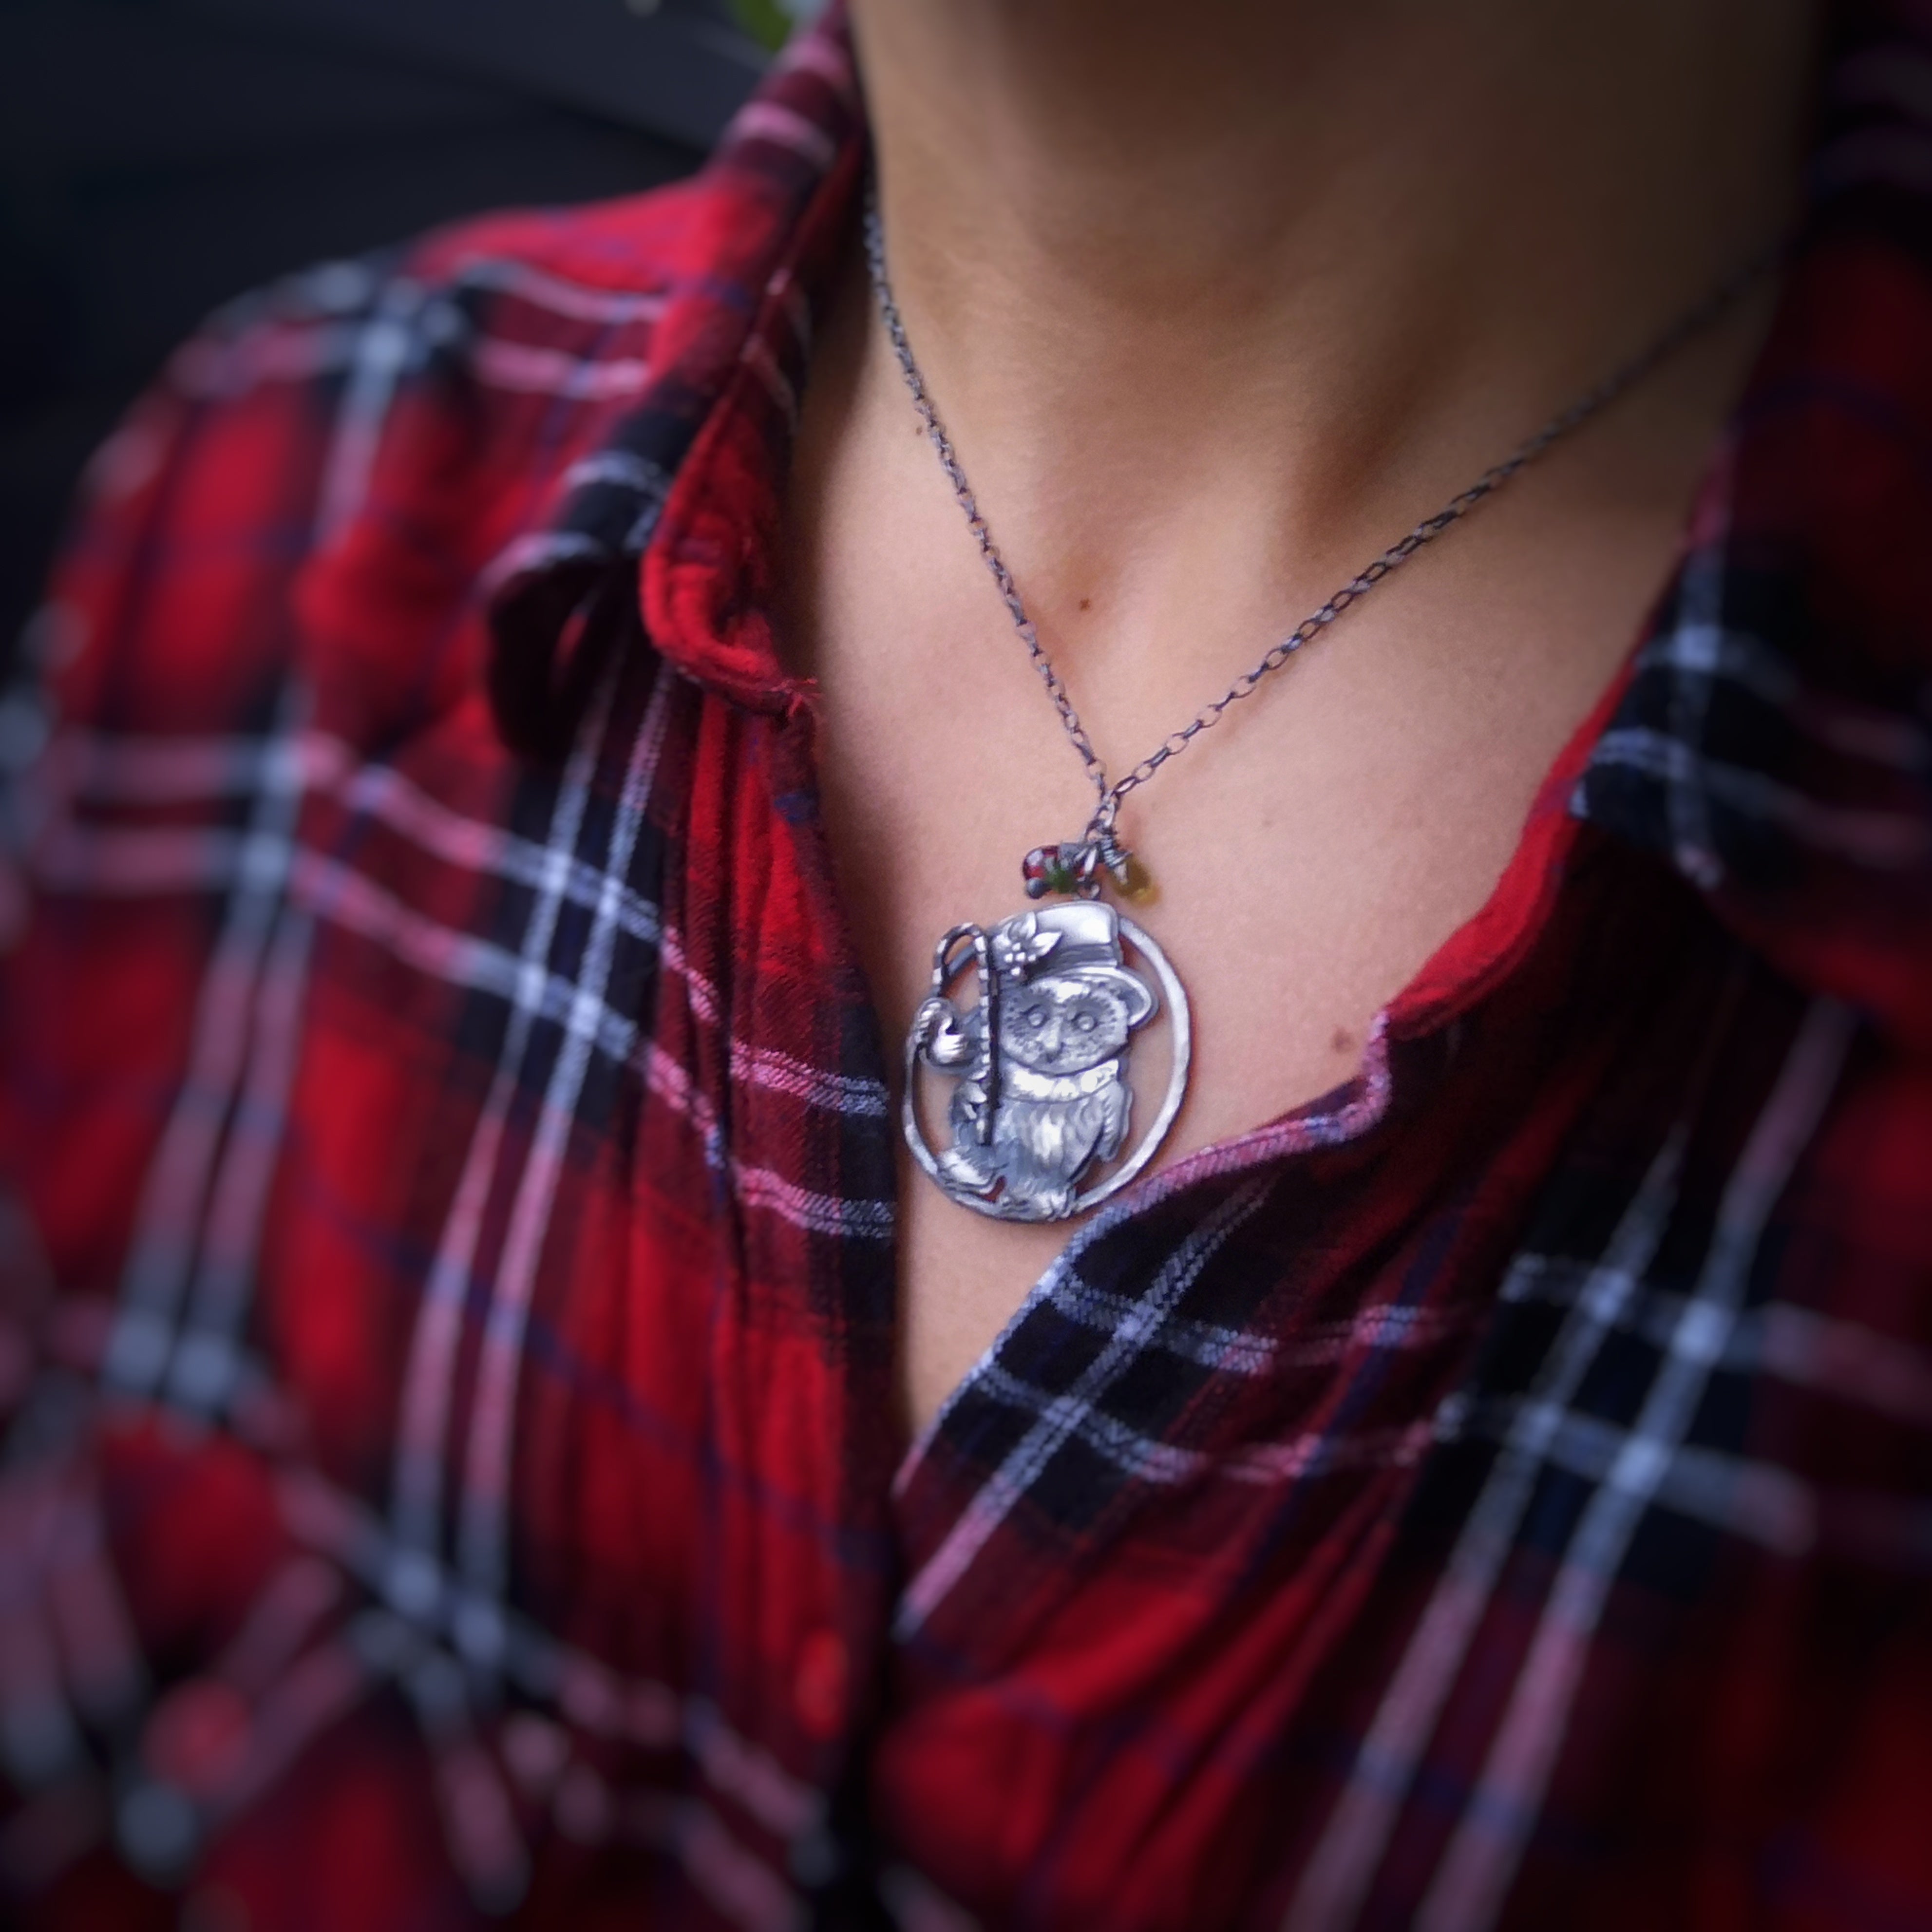 The Very Merry Owl Necklace